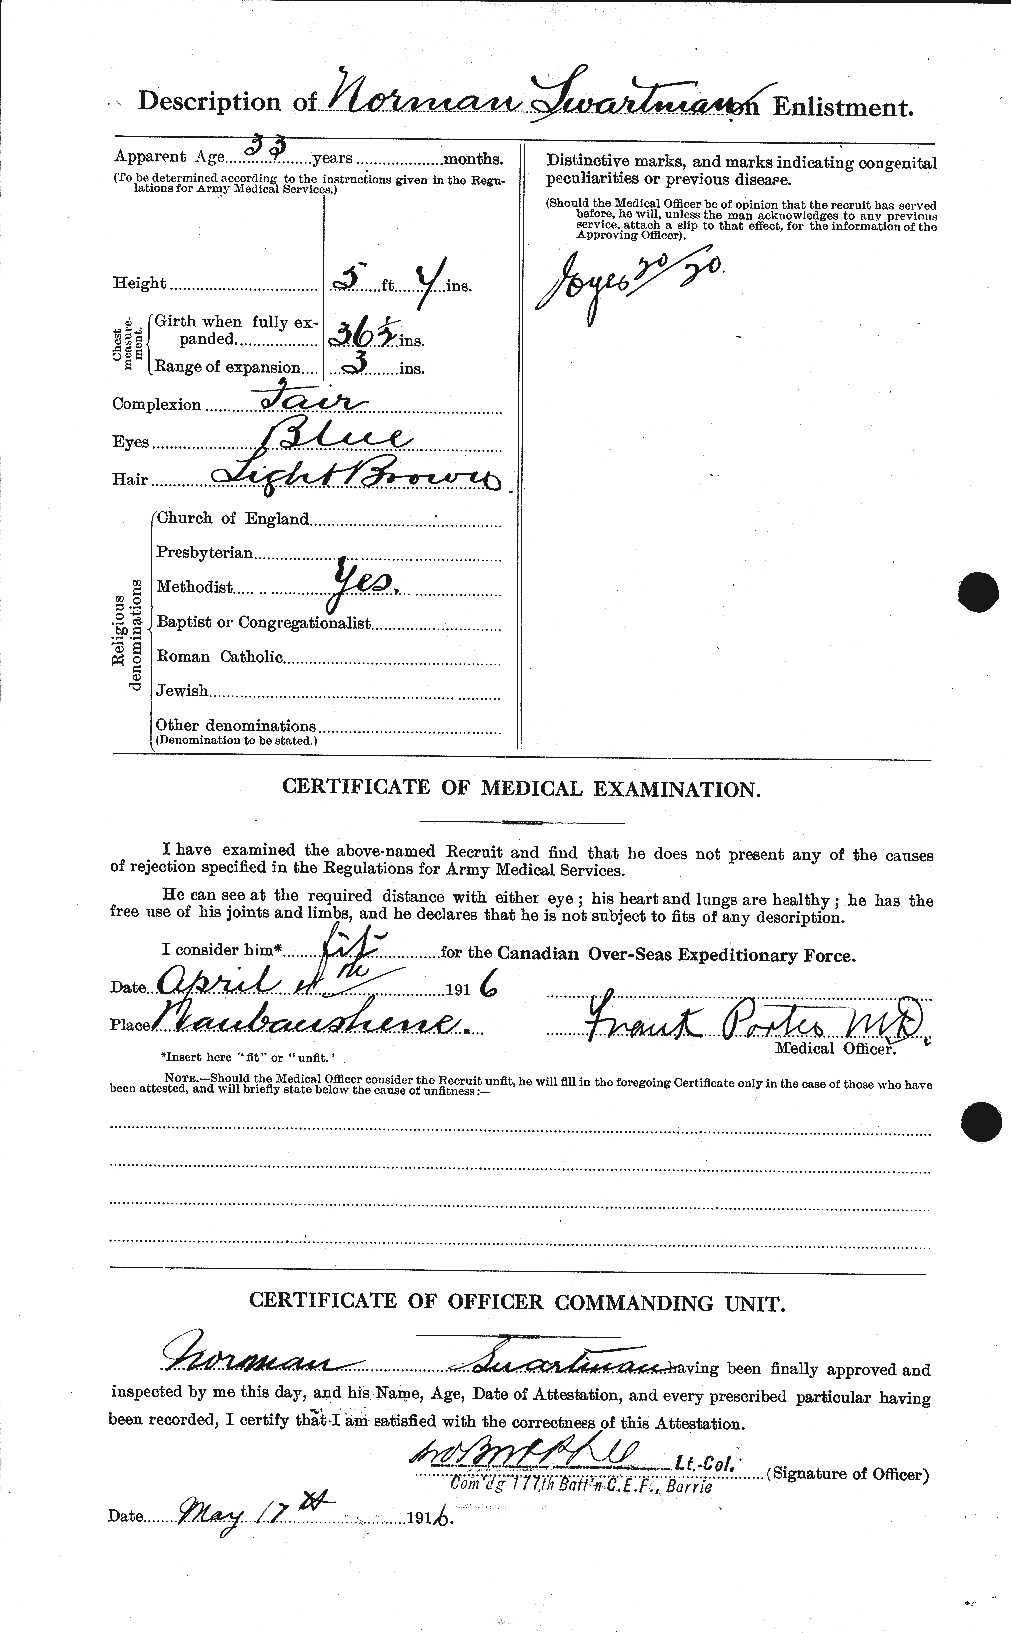 Personnel Records of the First World War - CEF 126362b